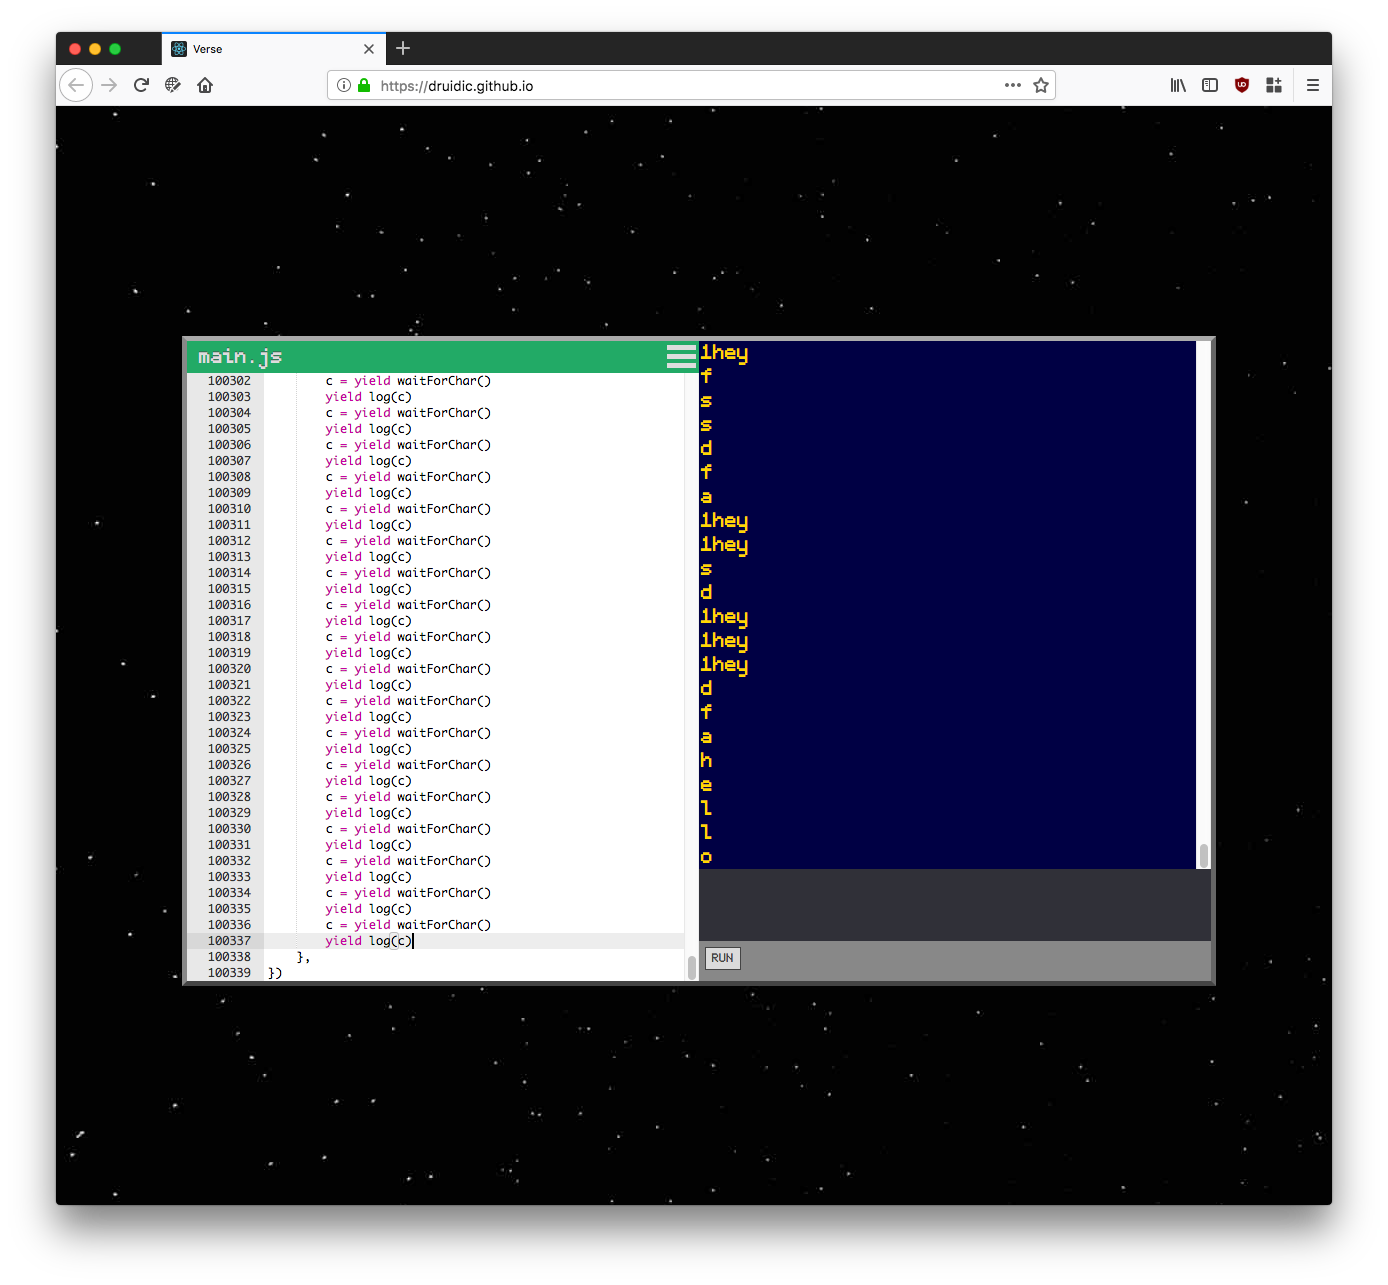 screenshot of the Verse editor with over 100,000 lines of code